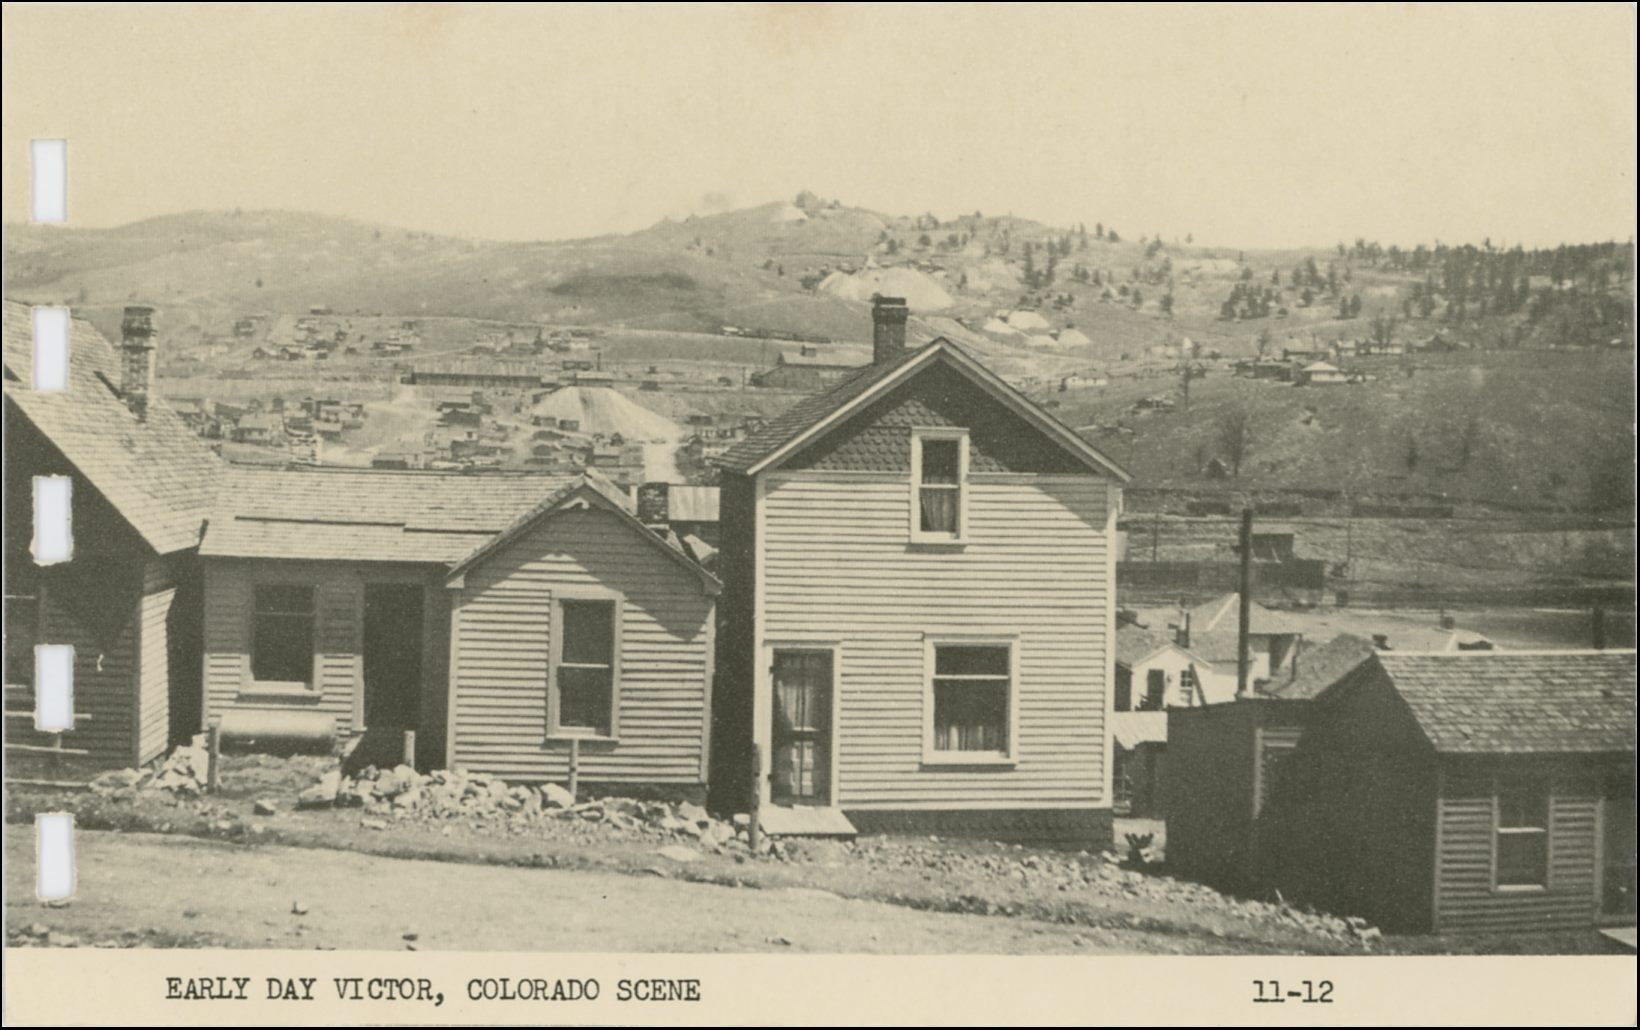 This view of Gold Hill from a street in southern Cripple Creek is mislabeled to be an early Victor scene for some unknown reason. Being this is from a printed card in a small more modern postcard folder it is not the greatest quality, but one gets an idea of the area it pictured. I've been unable to pinpoint the street in the foreground, but I think it might be the First Street, possible south Colorado Ave., but I doubt it as this don't look that far up the hill.
* Either way, about center left/right and 1/3 down from top, behind the two-story house in foreground, on get to see the north half of the Cripple Creek Sampler, located up along the M.T. roadbed, with the Short Line railroad below it, having come around the hill at right hand side. Incidentally, the original locating of the sampler was along the F. & C.C. grade seen just below the top/down center on the right-hand side, and would have been hidden by the same two-story house.
* About 1/3 down from top, and 1/3 from left-hand side, a long structure will be seen, that is the Trolley Barn for the High/Low Lines of the Electric System of the Short Line railroad. The big dump just right of the Trolley barn I think is part of the Cripple Creek & Gold Hill Deep Mining & Development Company operations.
* Straight up from the chimney on the before mention 2-story house there is a big dump that I think is part of the Midget operations.
* About center left/right and not fully 1/6 down from top, above the before mention Midget, is the characteristic shape of the large Shaft-House of the Anchoria-Leland mine seen against the sky at top of Gold Hill.